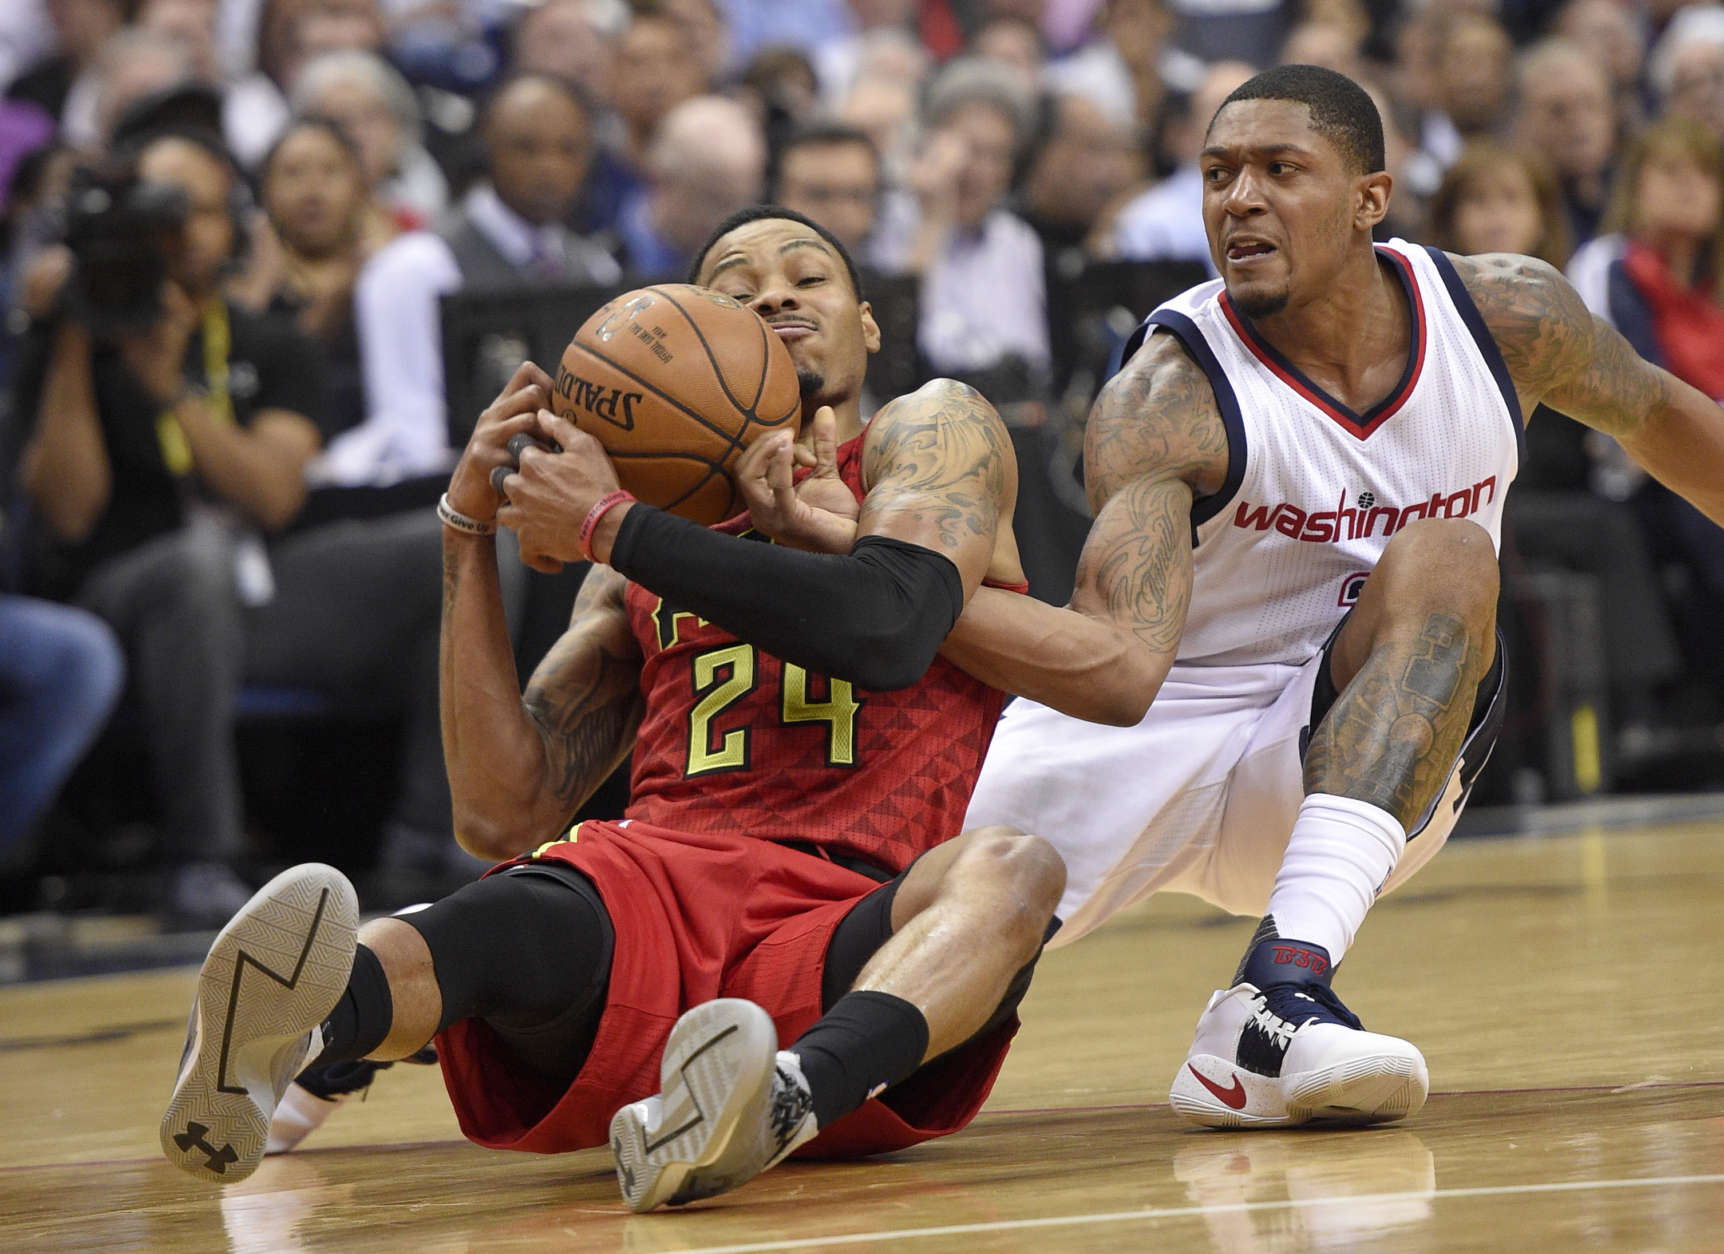 Washington Wizards guard Bradley Beal, right, battles for the ball against Atlanta Hawks forward Kent Bazemore (24) during the first half in Game 5 of a first-round NBA basketball playoff series, Wednesday, April 26, 2017, in Washington. (AP Photo/Nick Wass)